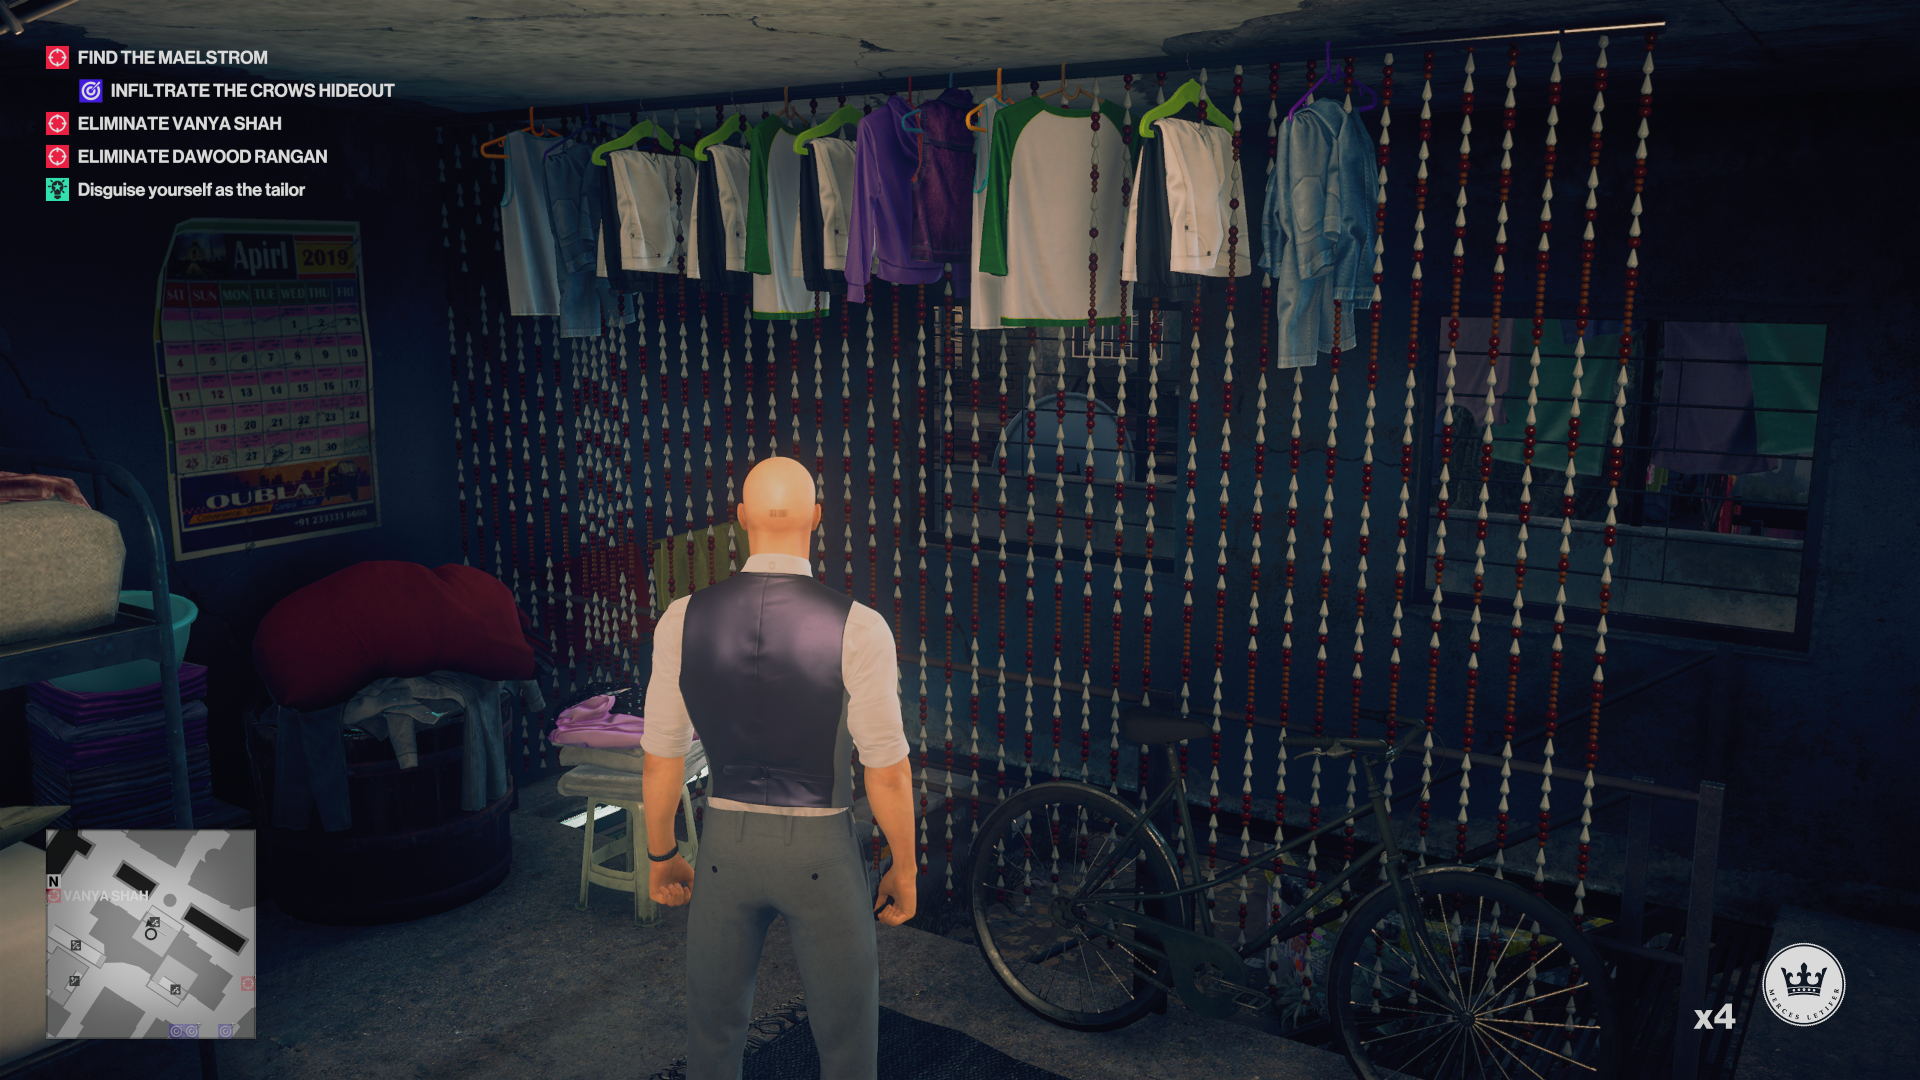 HITMAN 2 Starter Pack Offers First Location for Free